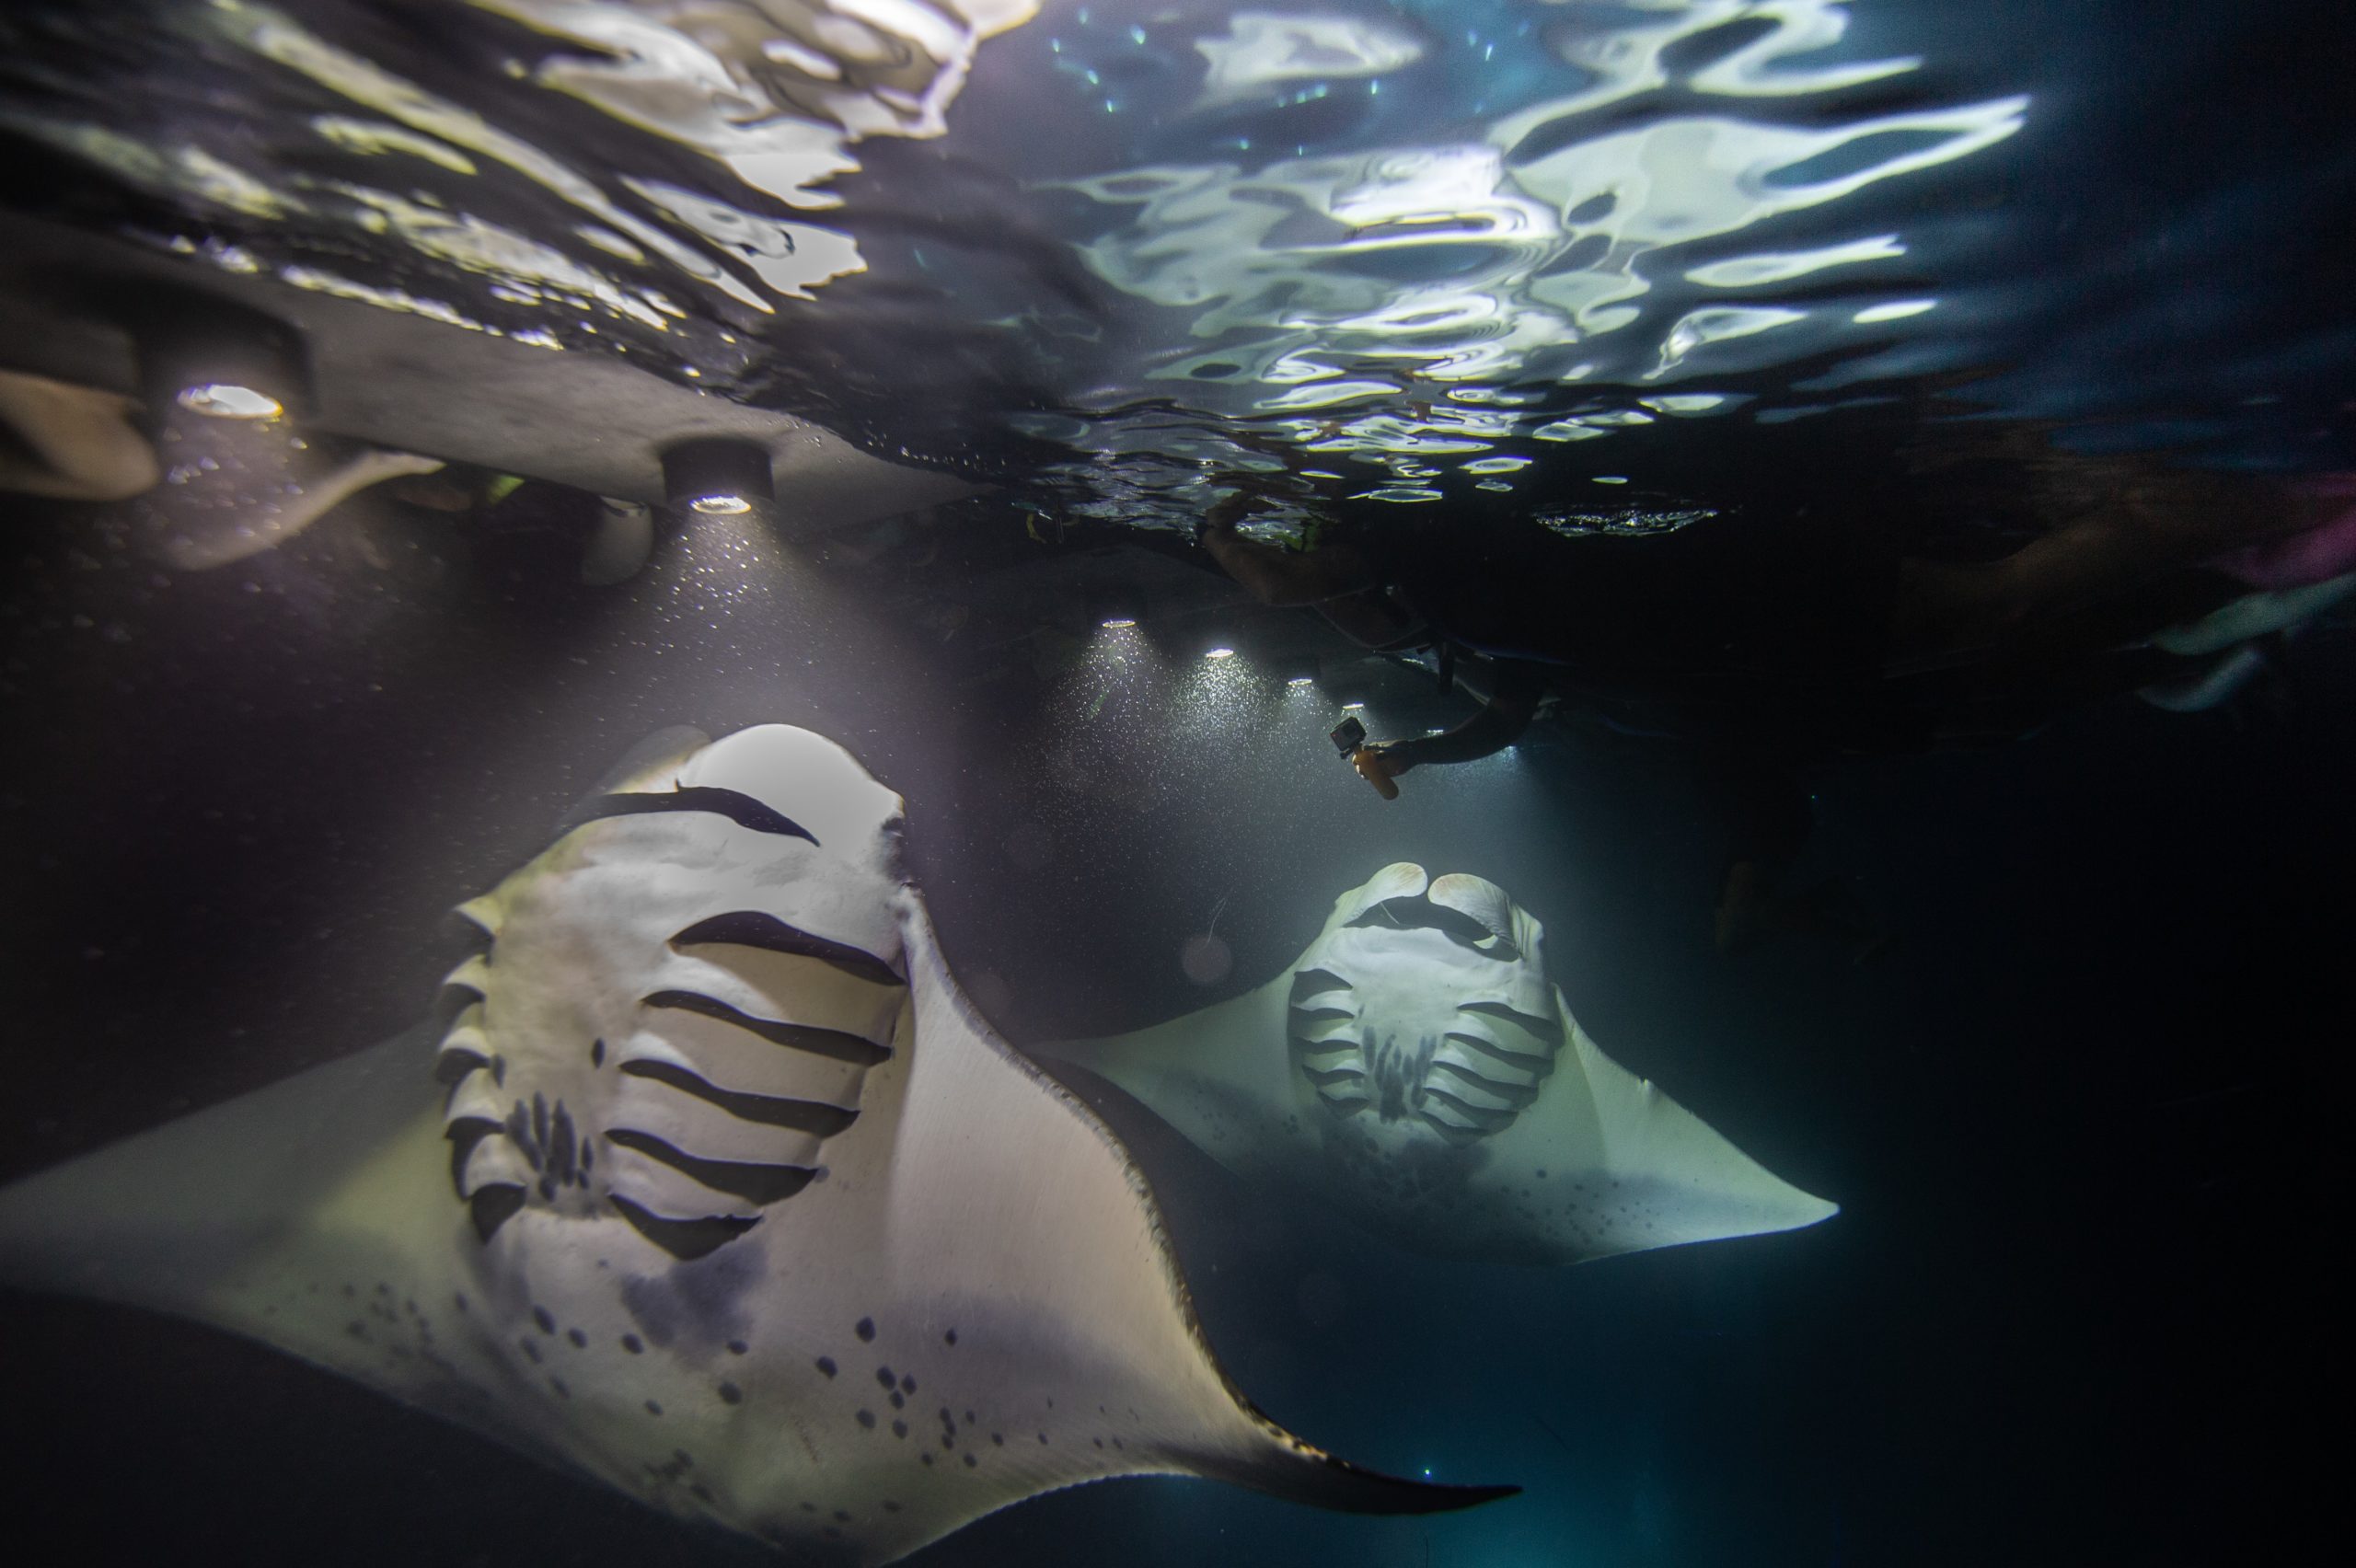 Best places to dive with Manta Rays